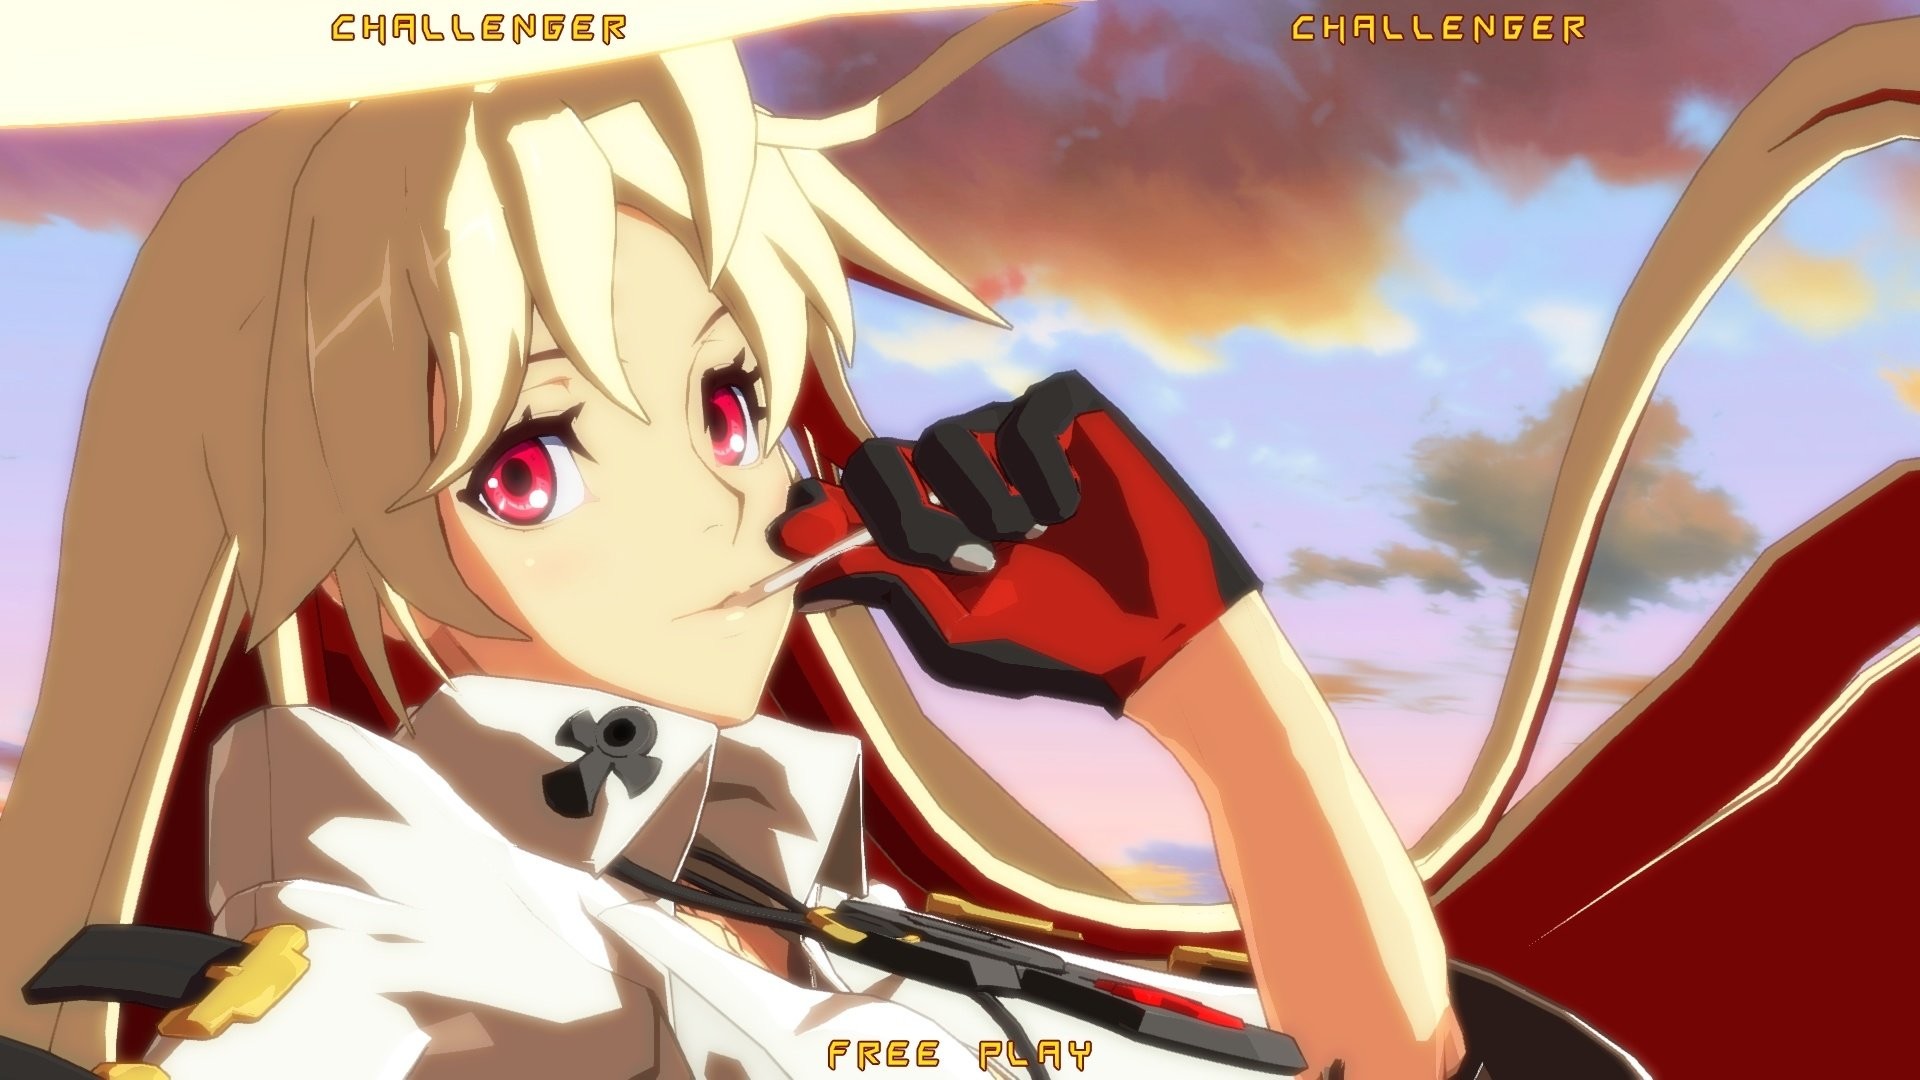 1920x1080 Guilty Gear Xrd Rev 2 Announced For Arcade, PS4, PS3, And PC; Baiken And  Answer Revealed [Siliconera -- Thanks, DV2Fox]